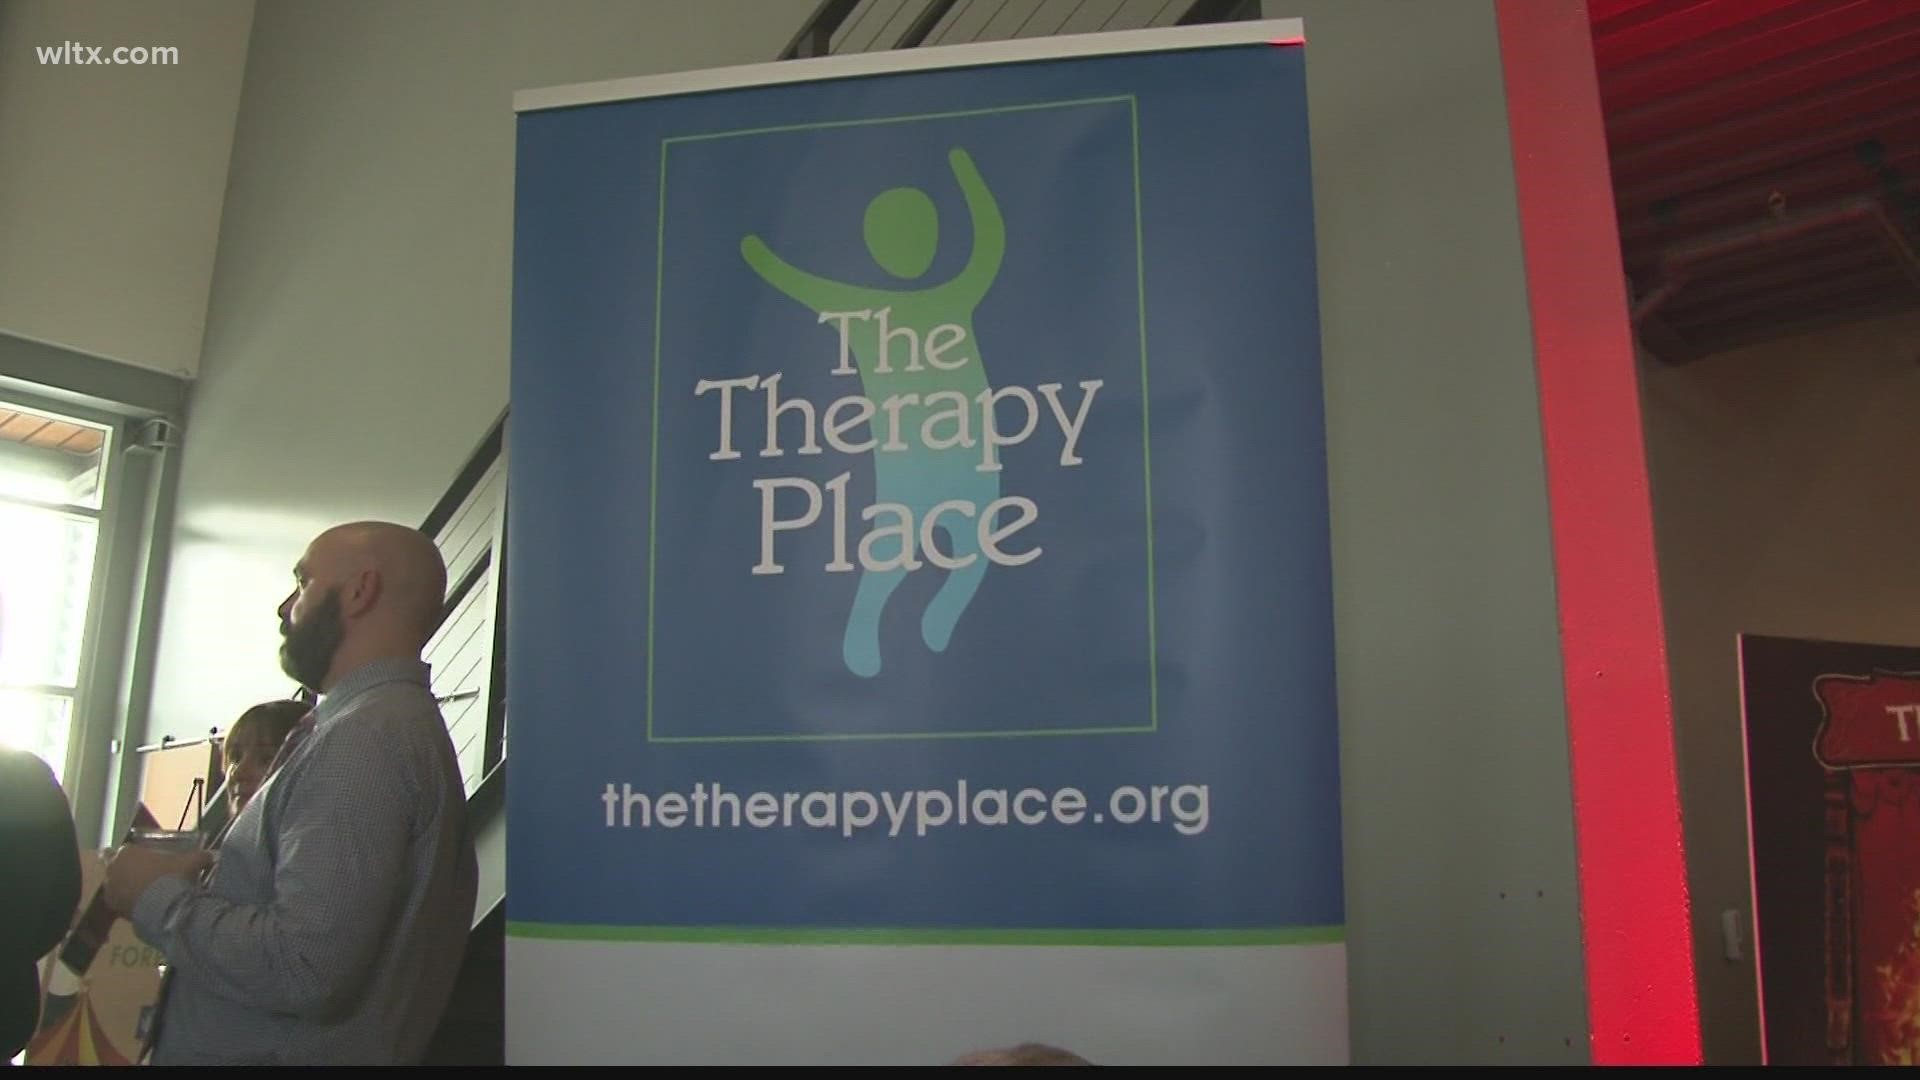 The annual Therapalooza event was hosted by The Therapy Place, which supports kids with physical and intellectual disabilities.